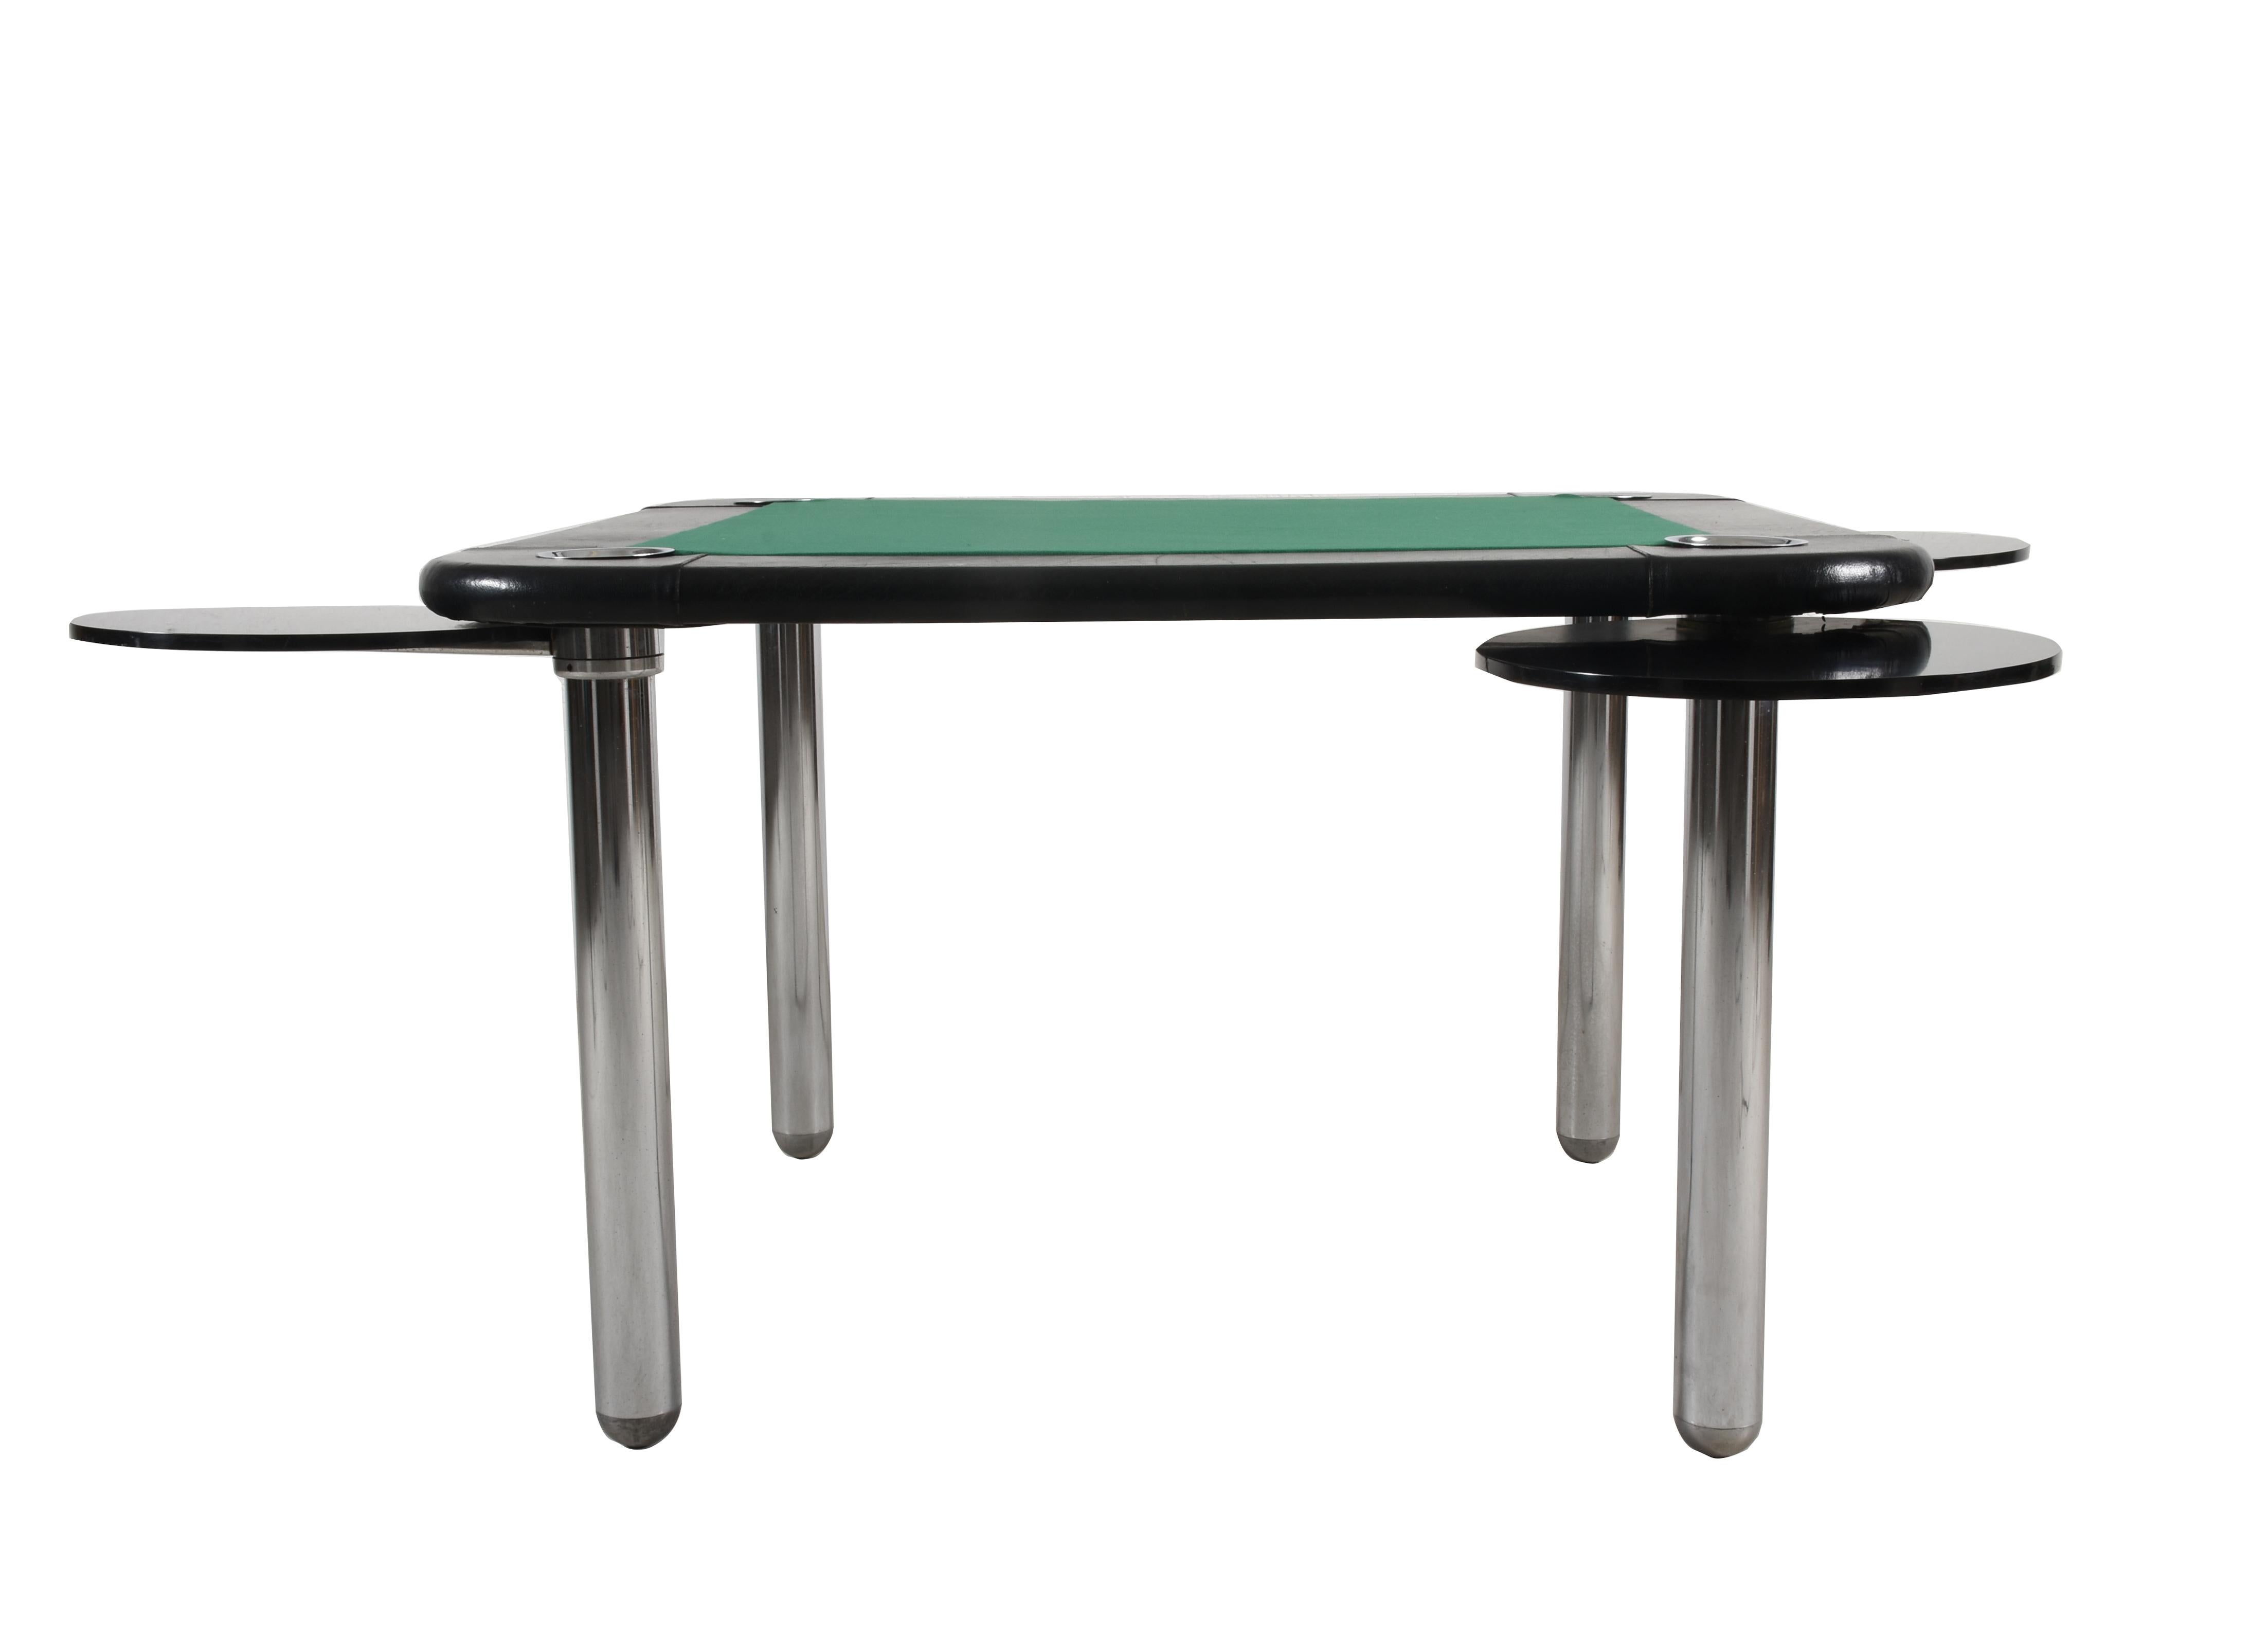 Mid-Century Modern Game Table in Leather and Chromed Steel, Attributable to Zanotta, Italy, 1960s